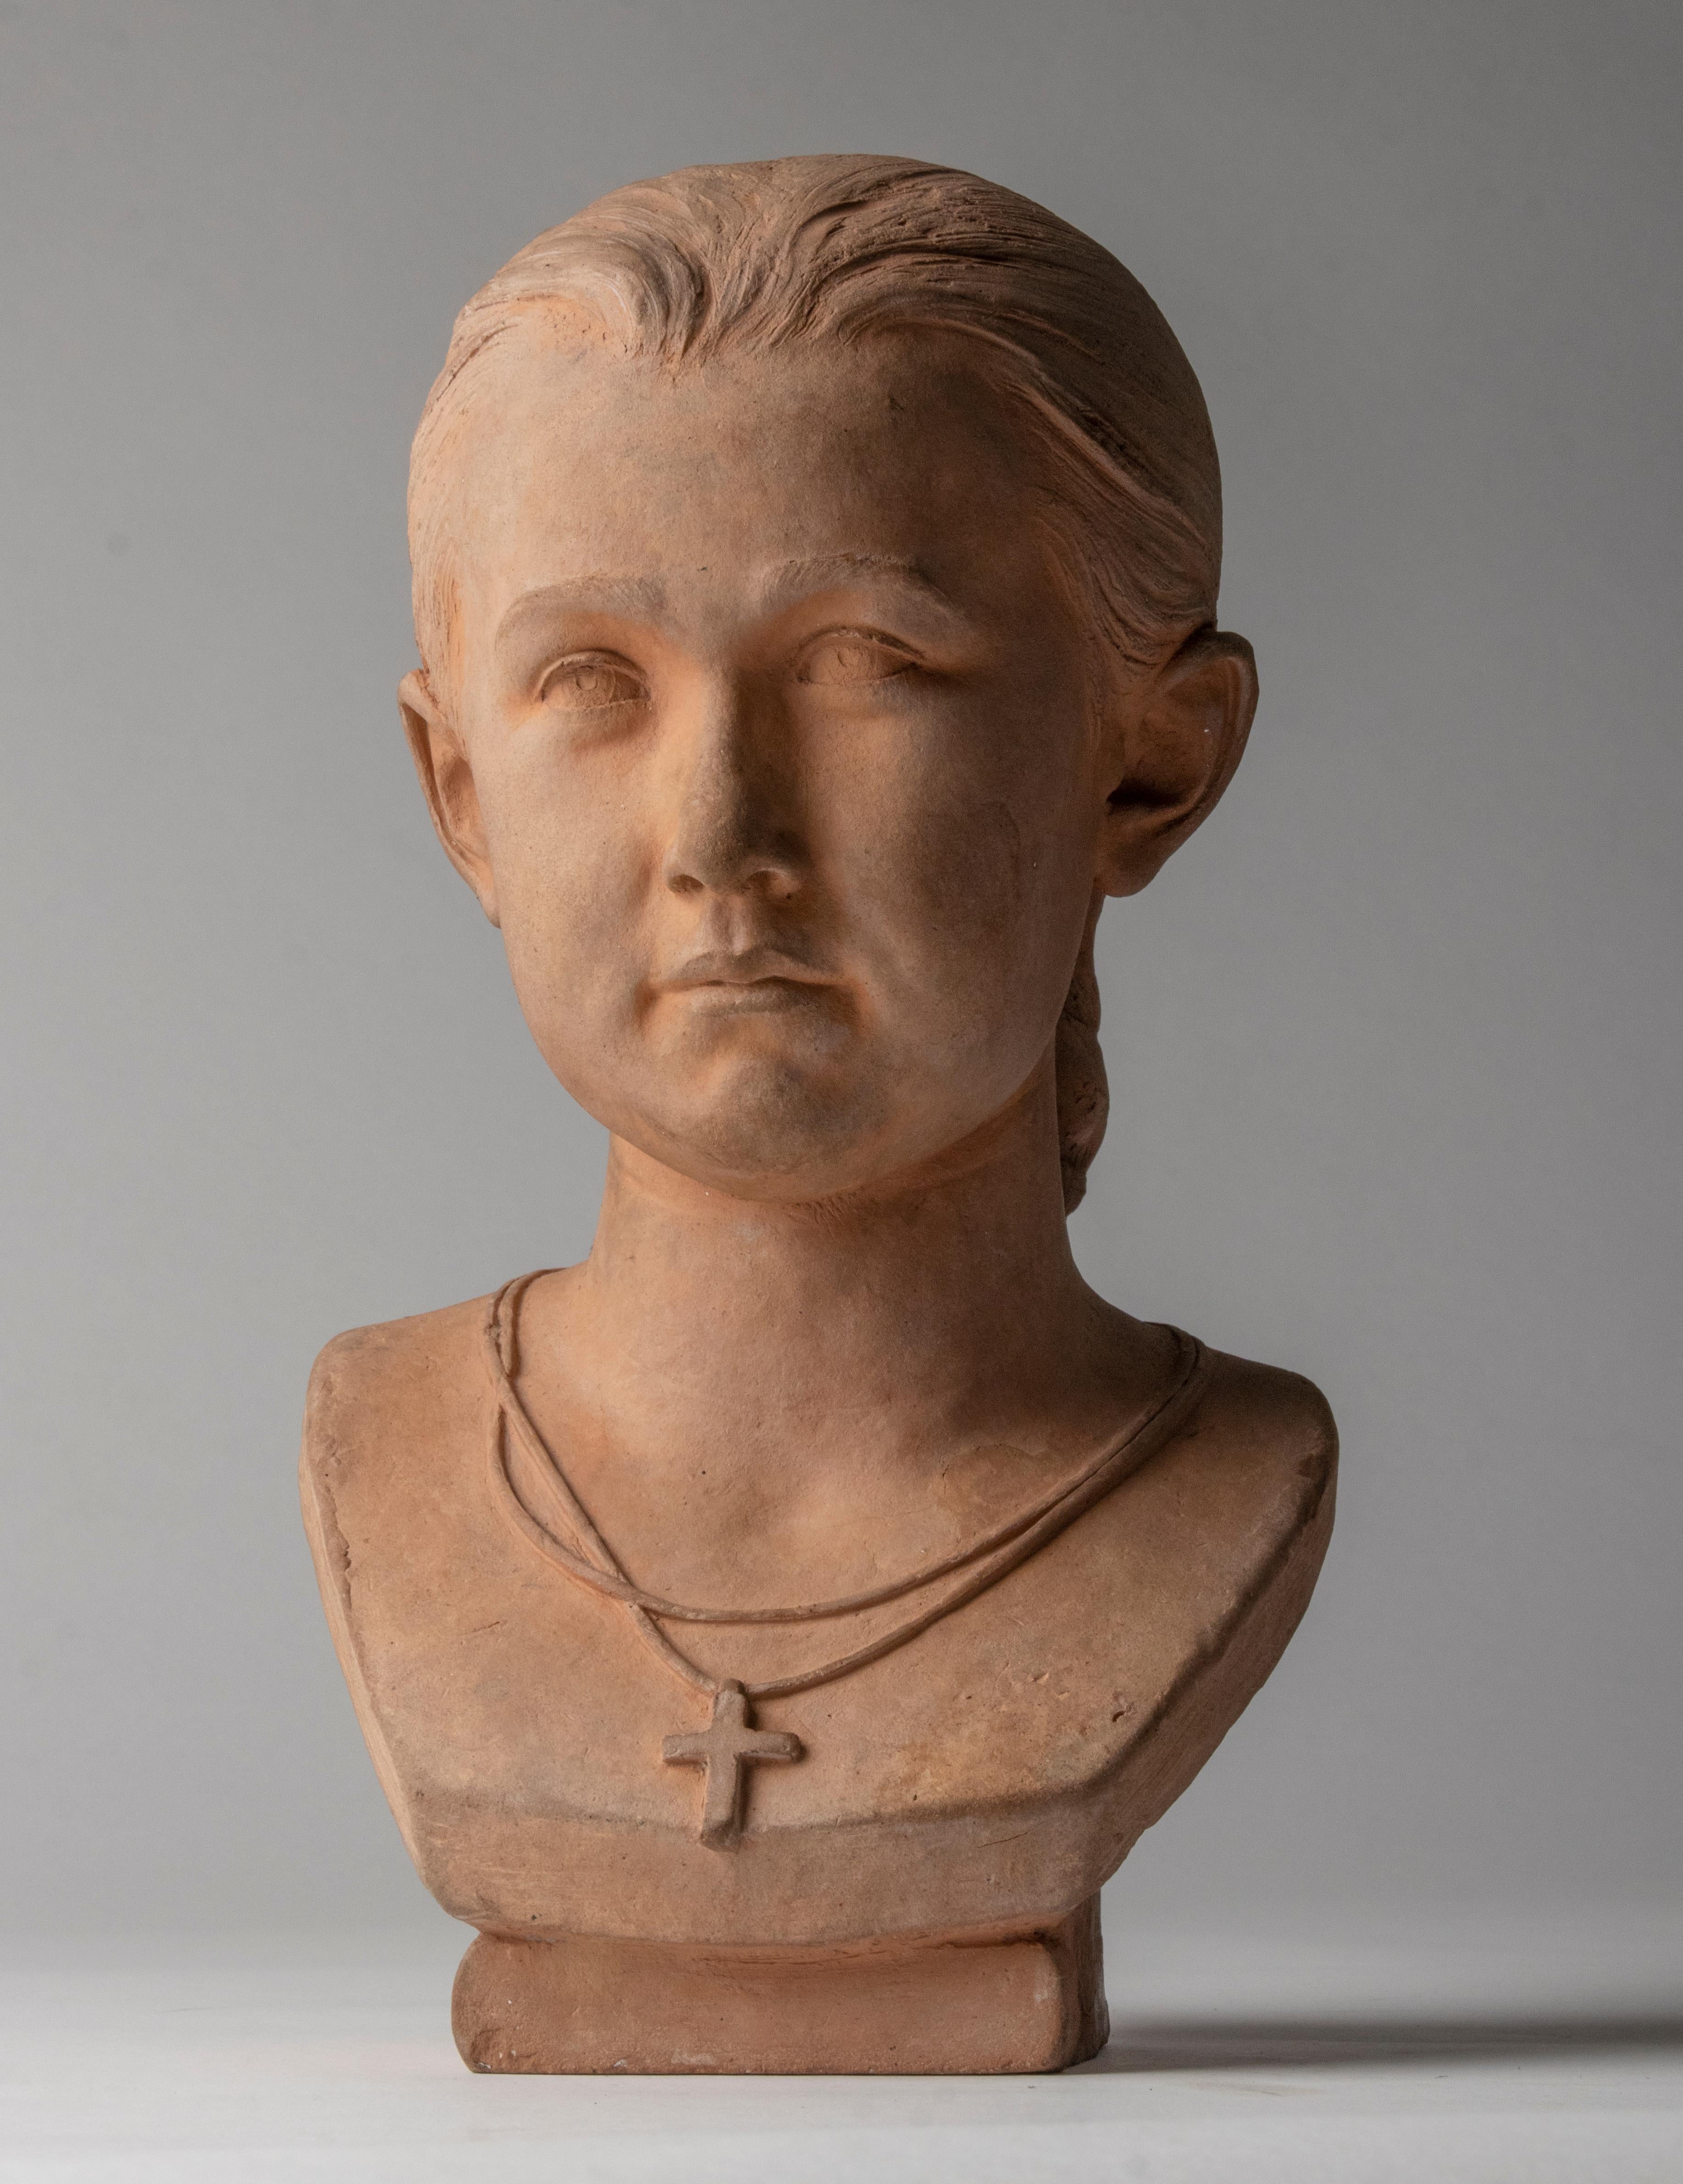 Beautiful antique sculpture by the French artist Jean Valette. The statue depicts a young girl, with a beautiful modest look and a Christian cross on a chain around her neck. The statue is made of terracotta, and has a beautiful antique